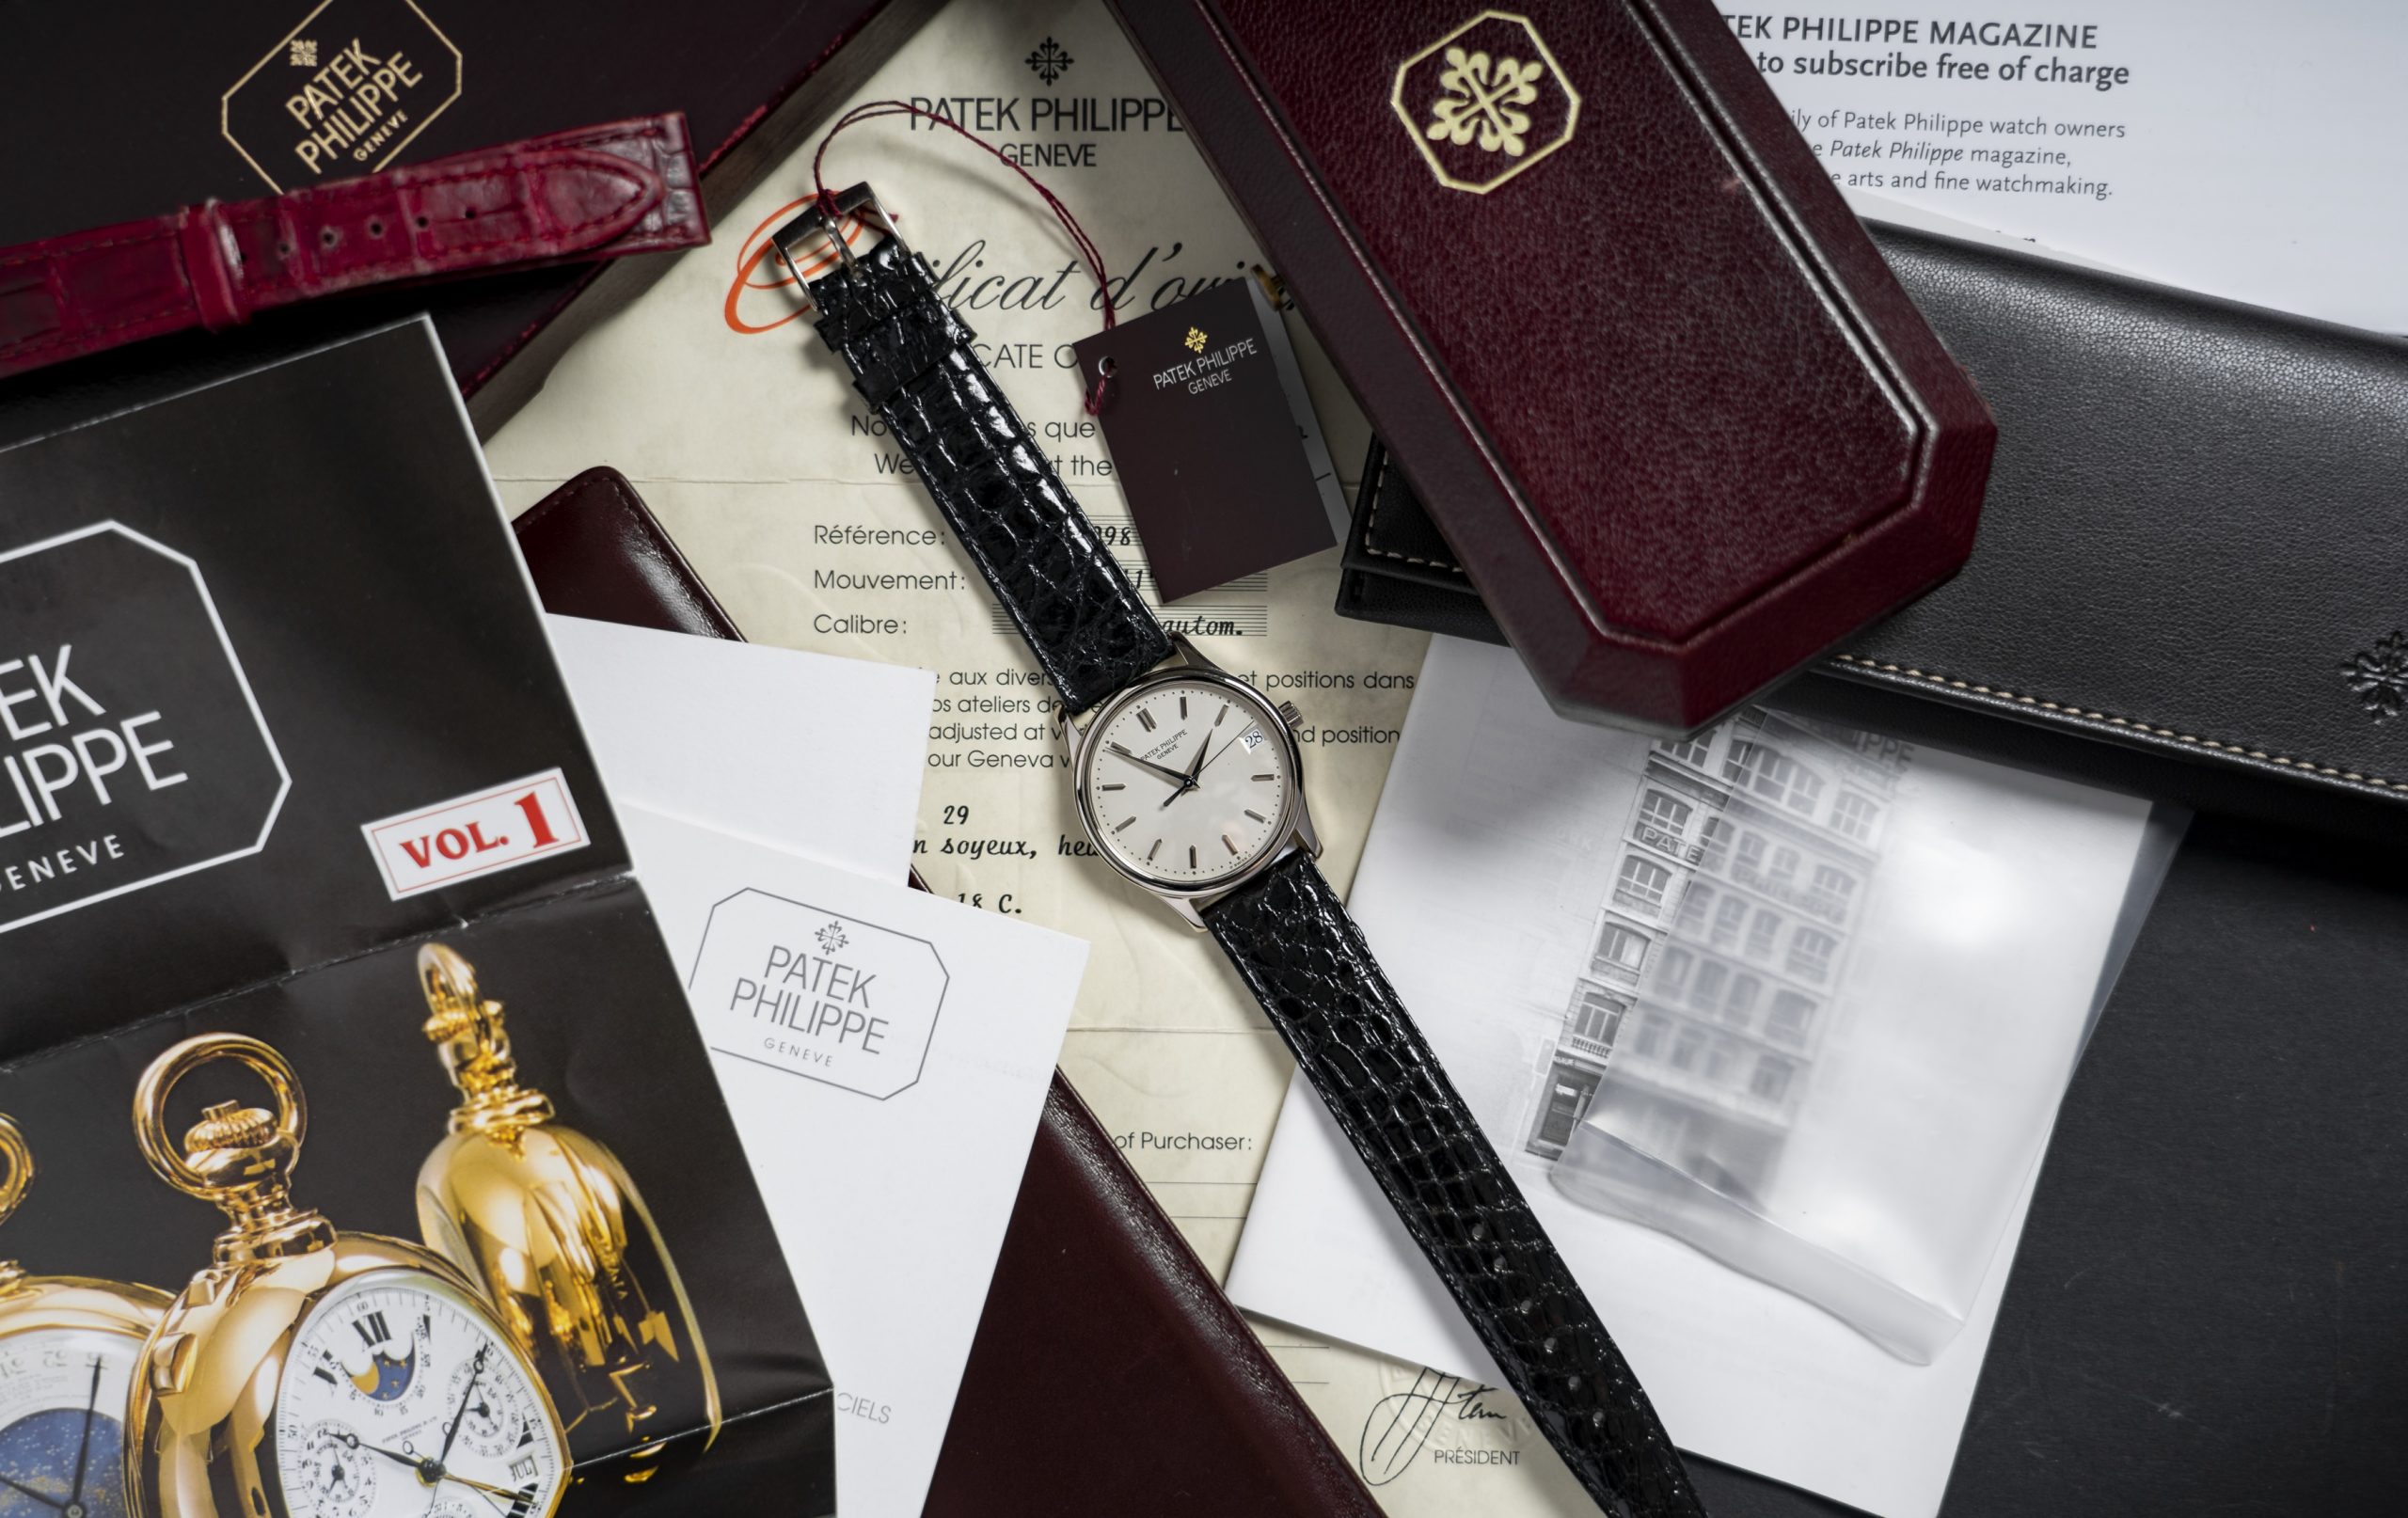 Buying a vintage watch? Here are the best stores in The Netherlands